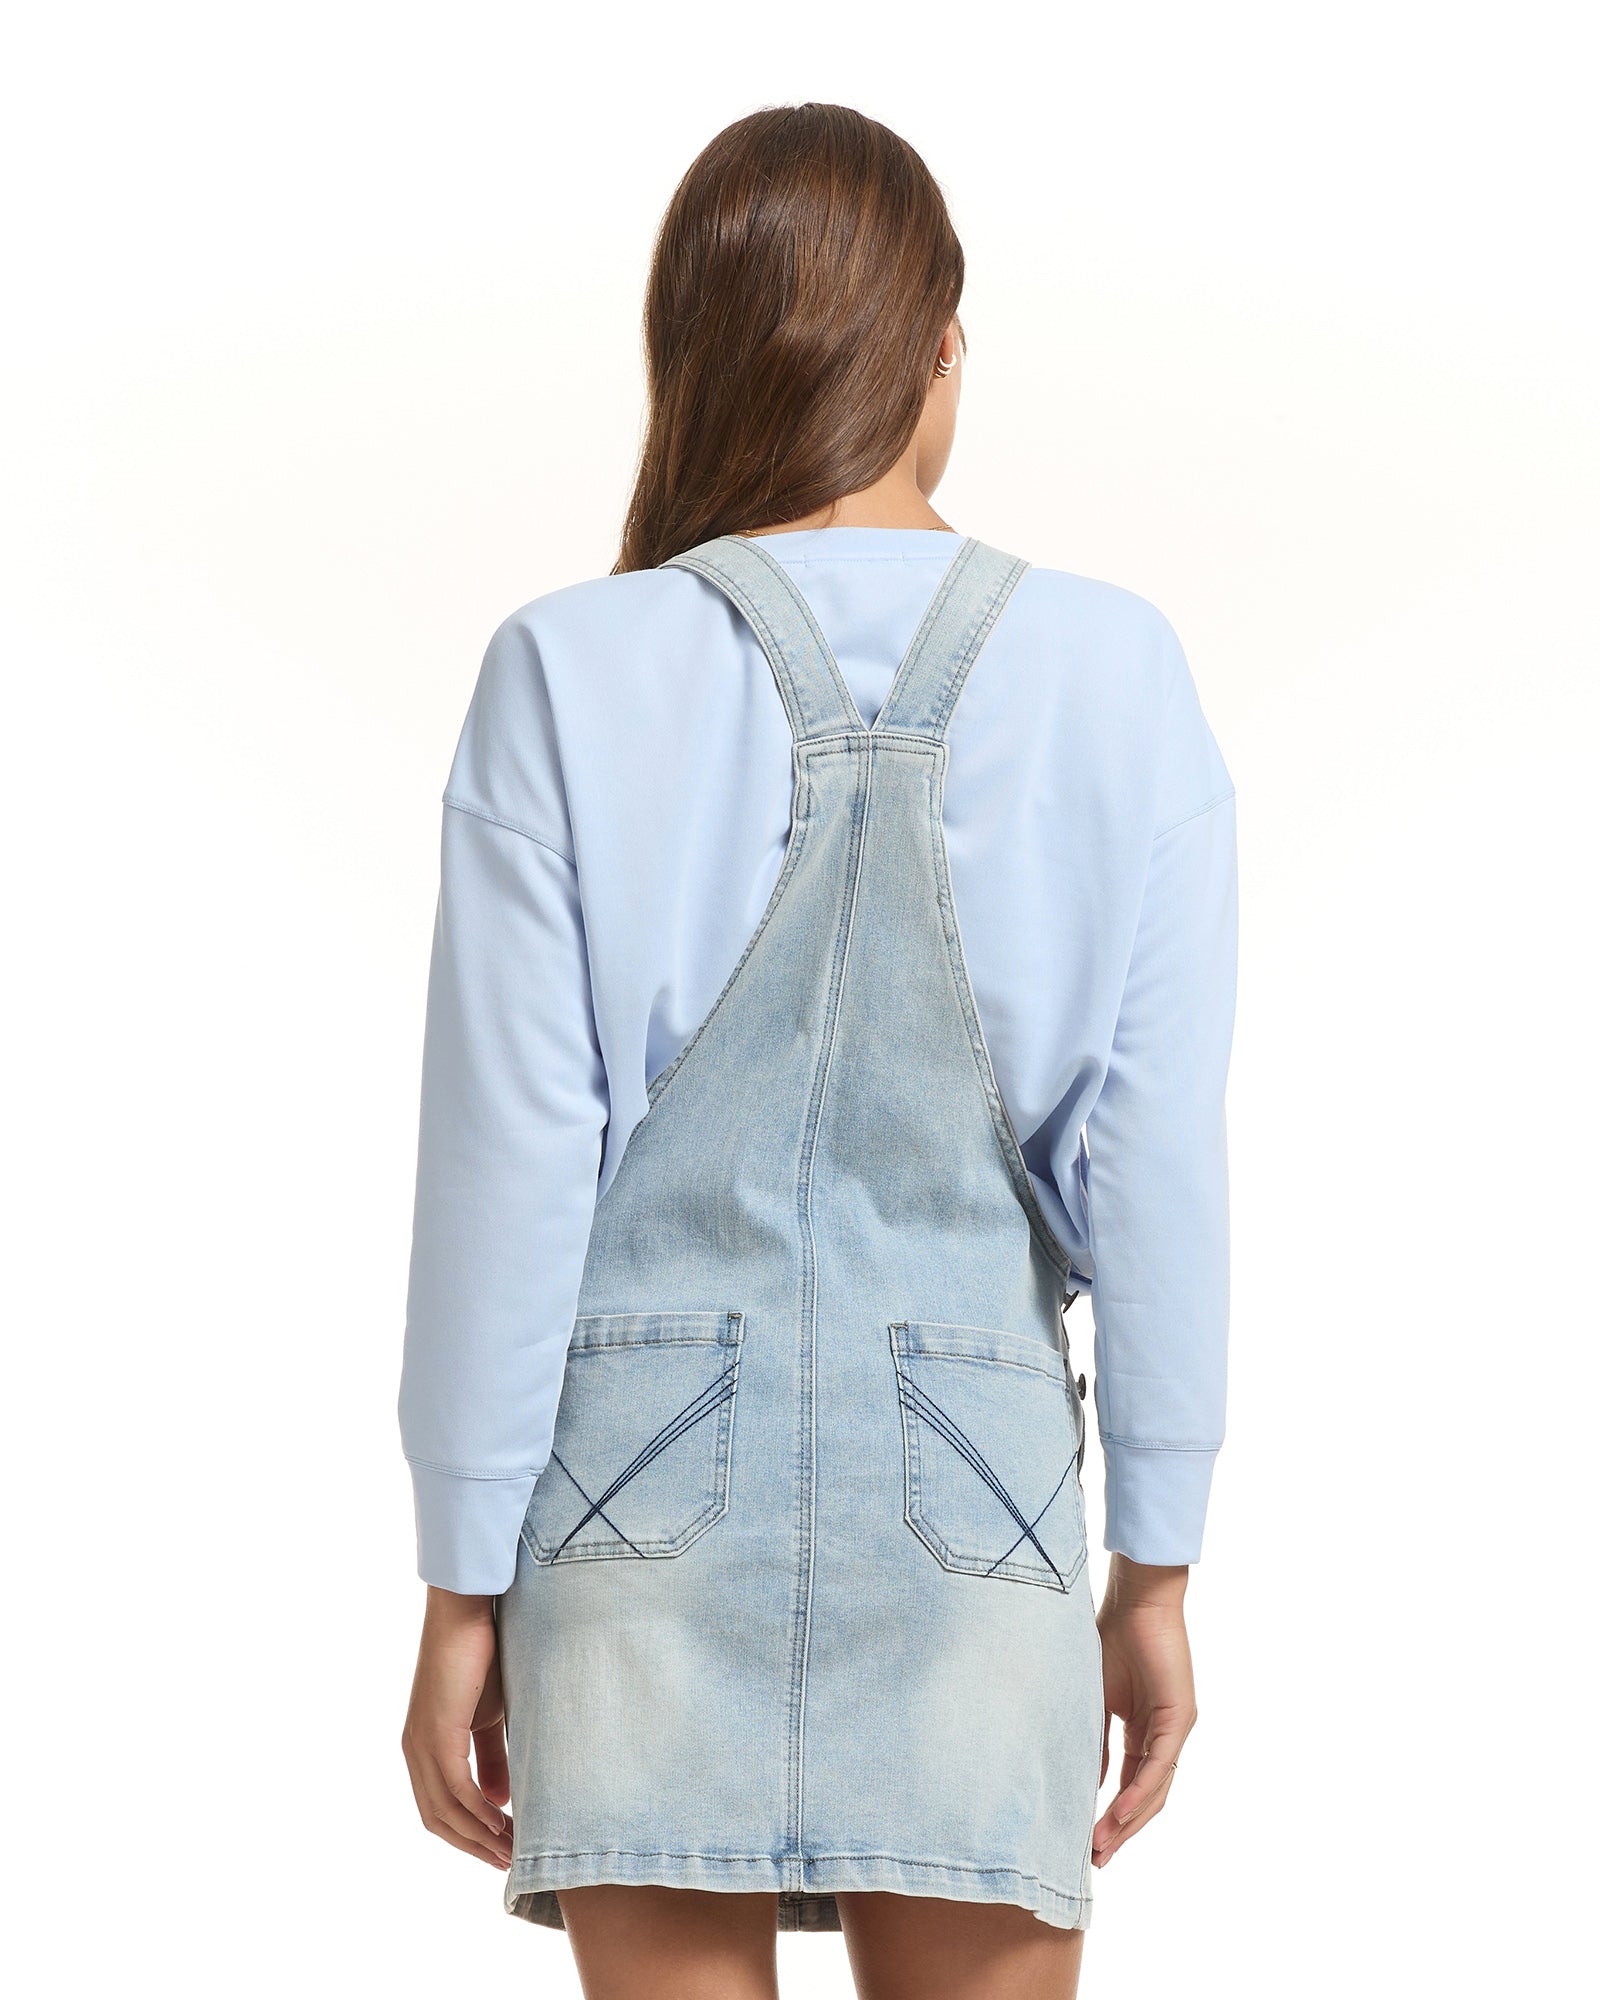 SHEIN Maternity Patched Pocket Denim Overall Dress | SHEIN ASIA